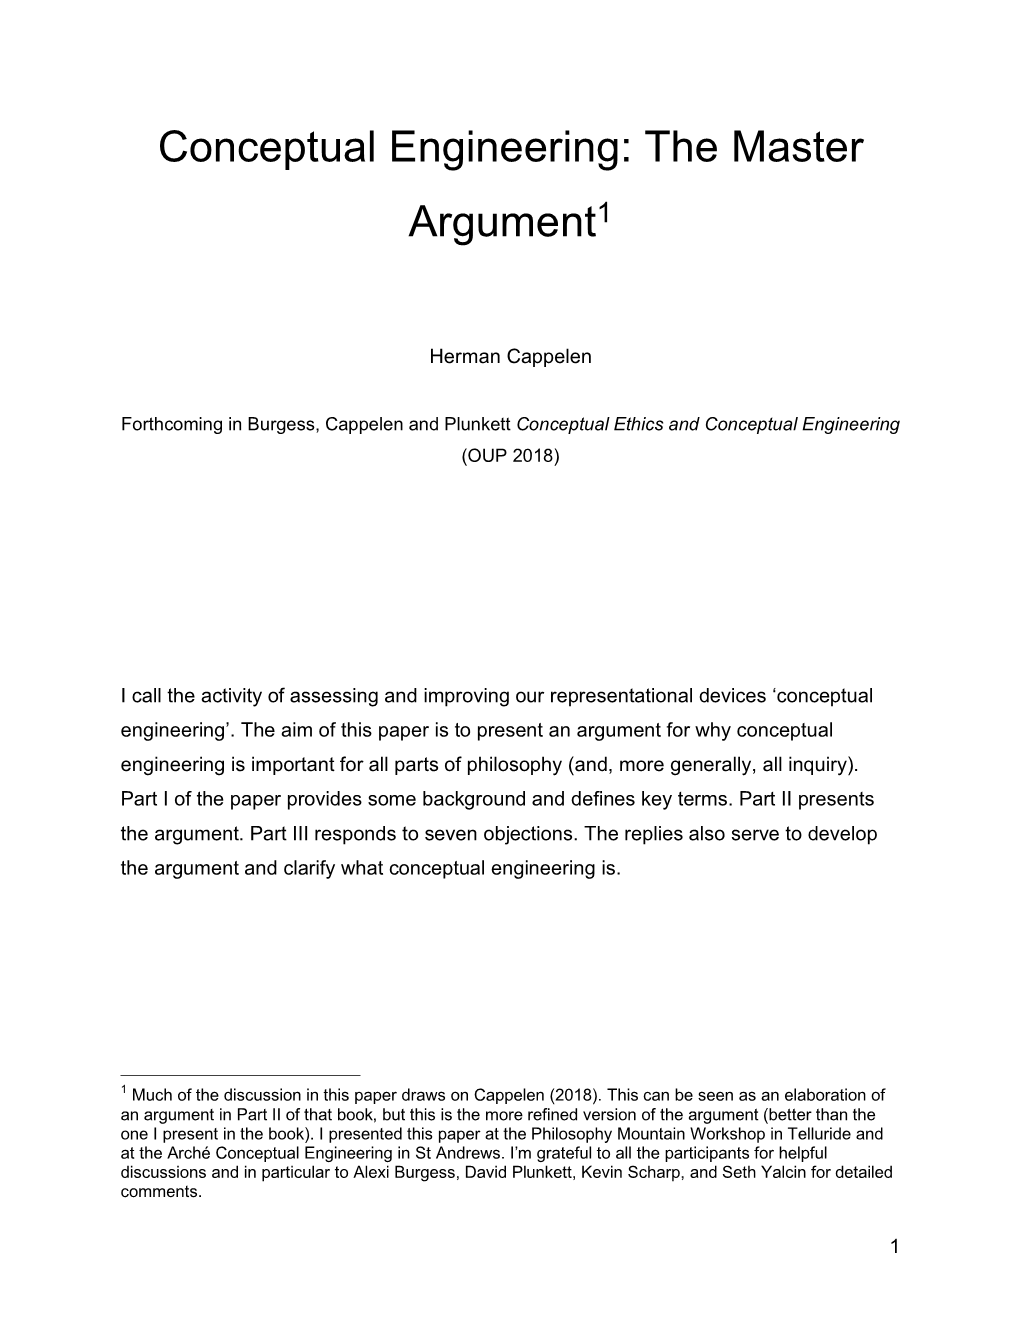 Conceptual Engineering: the Master Argument1